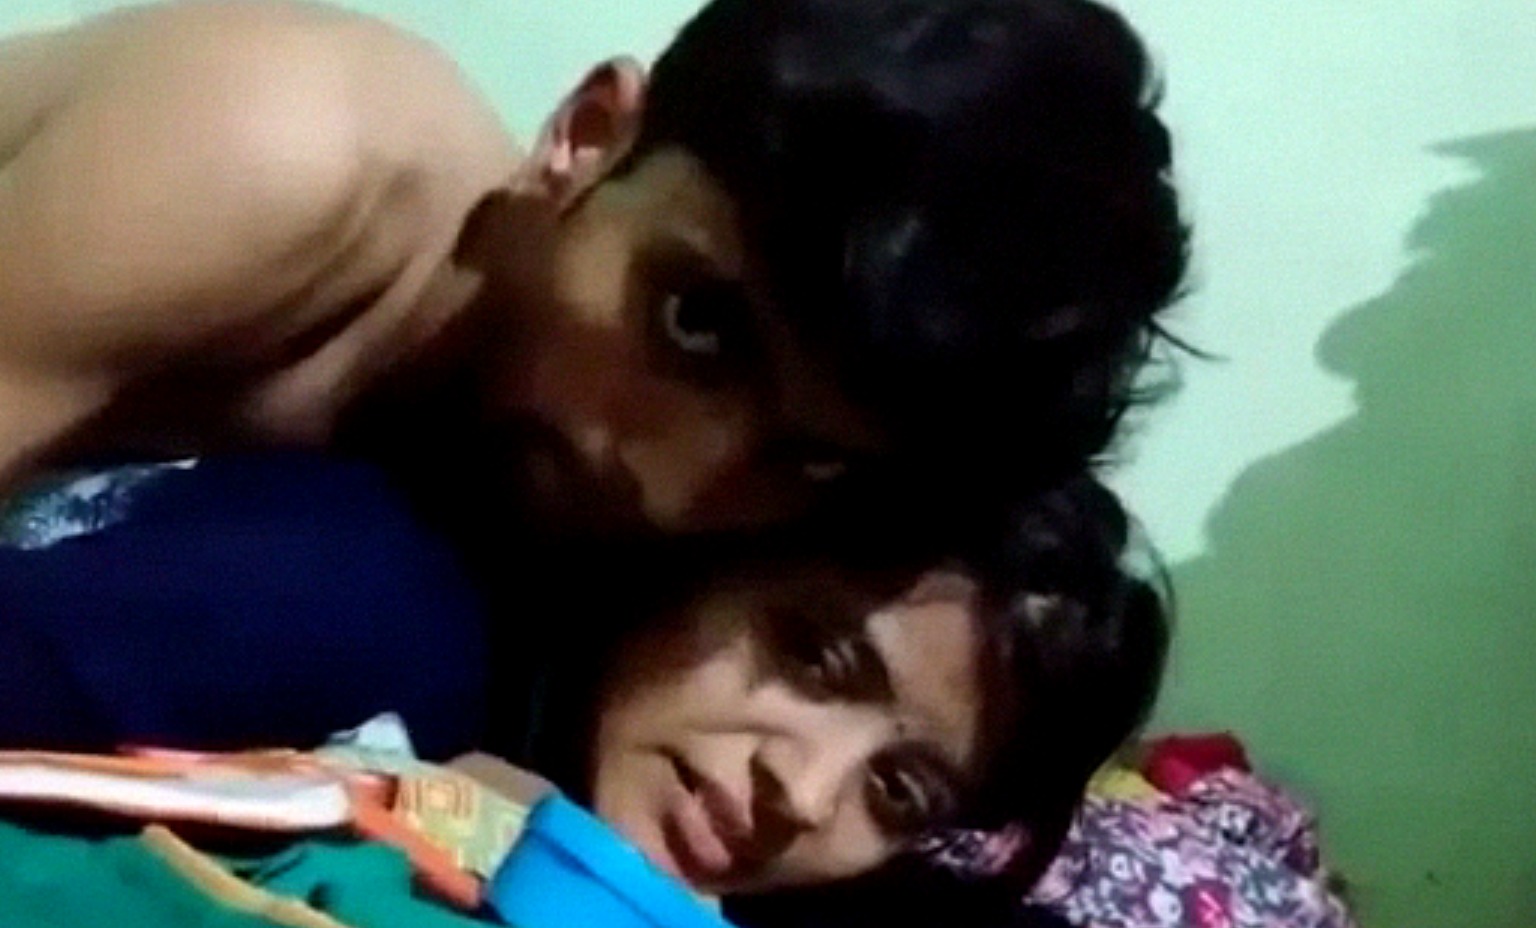 Super cute young Indian lovers ki sex video